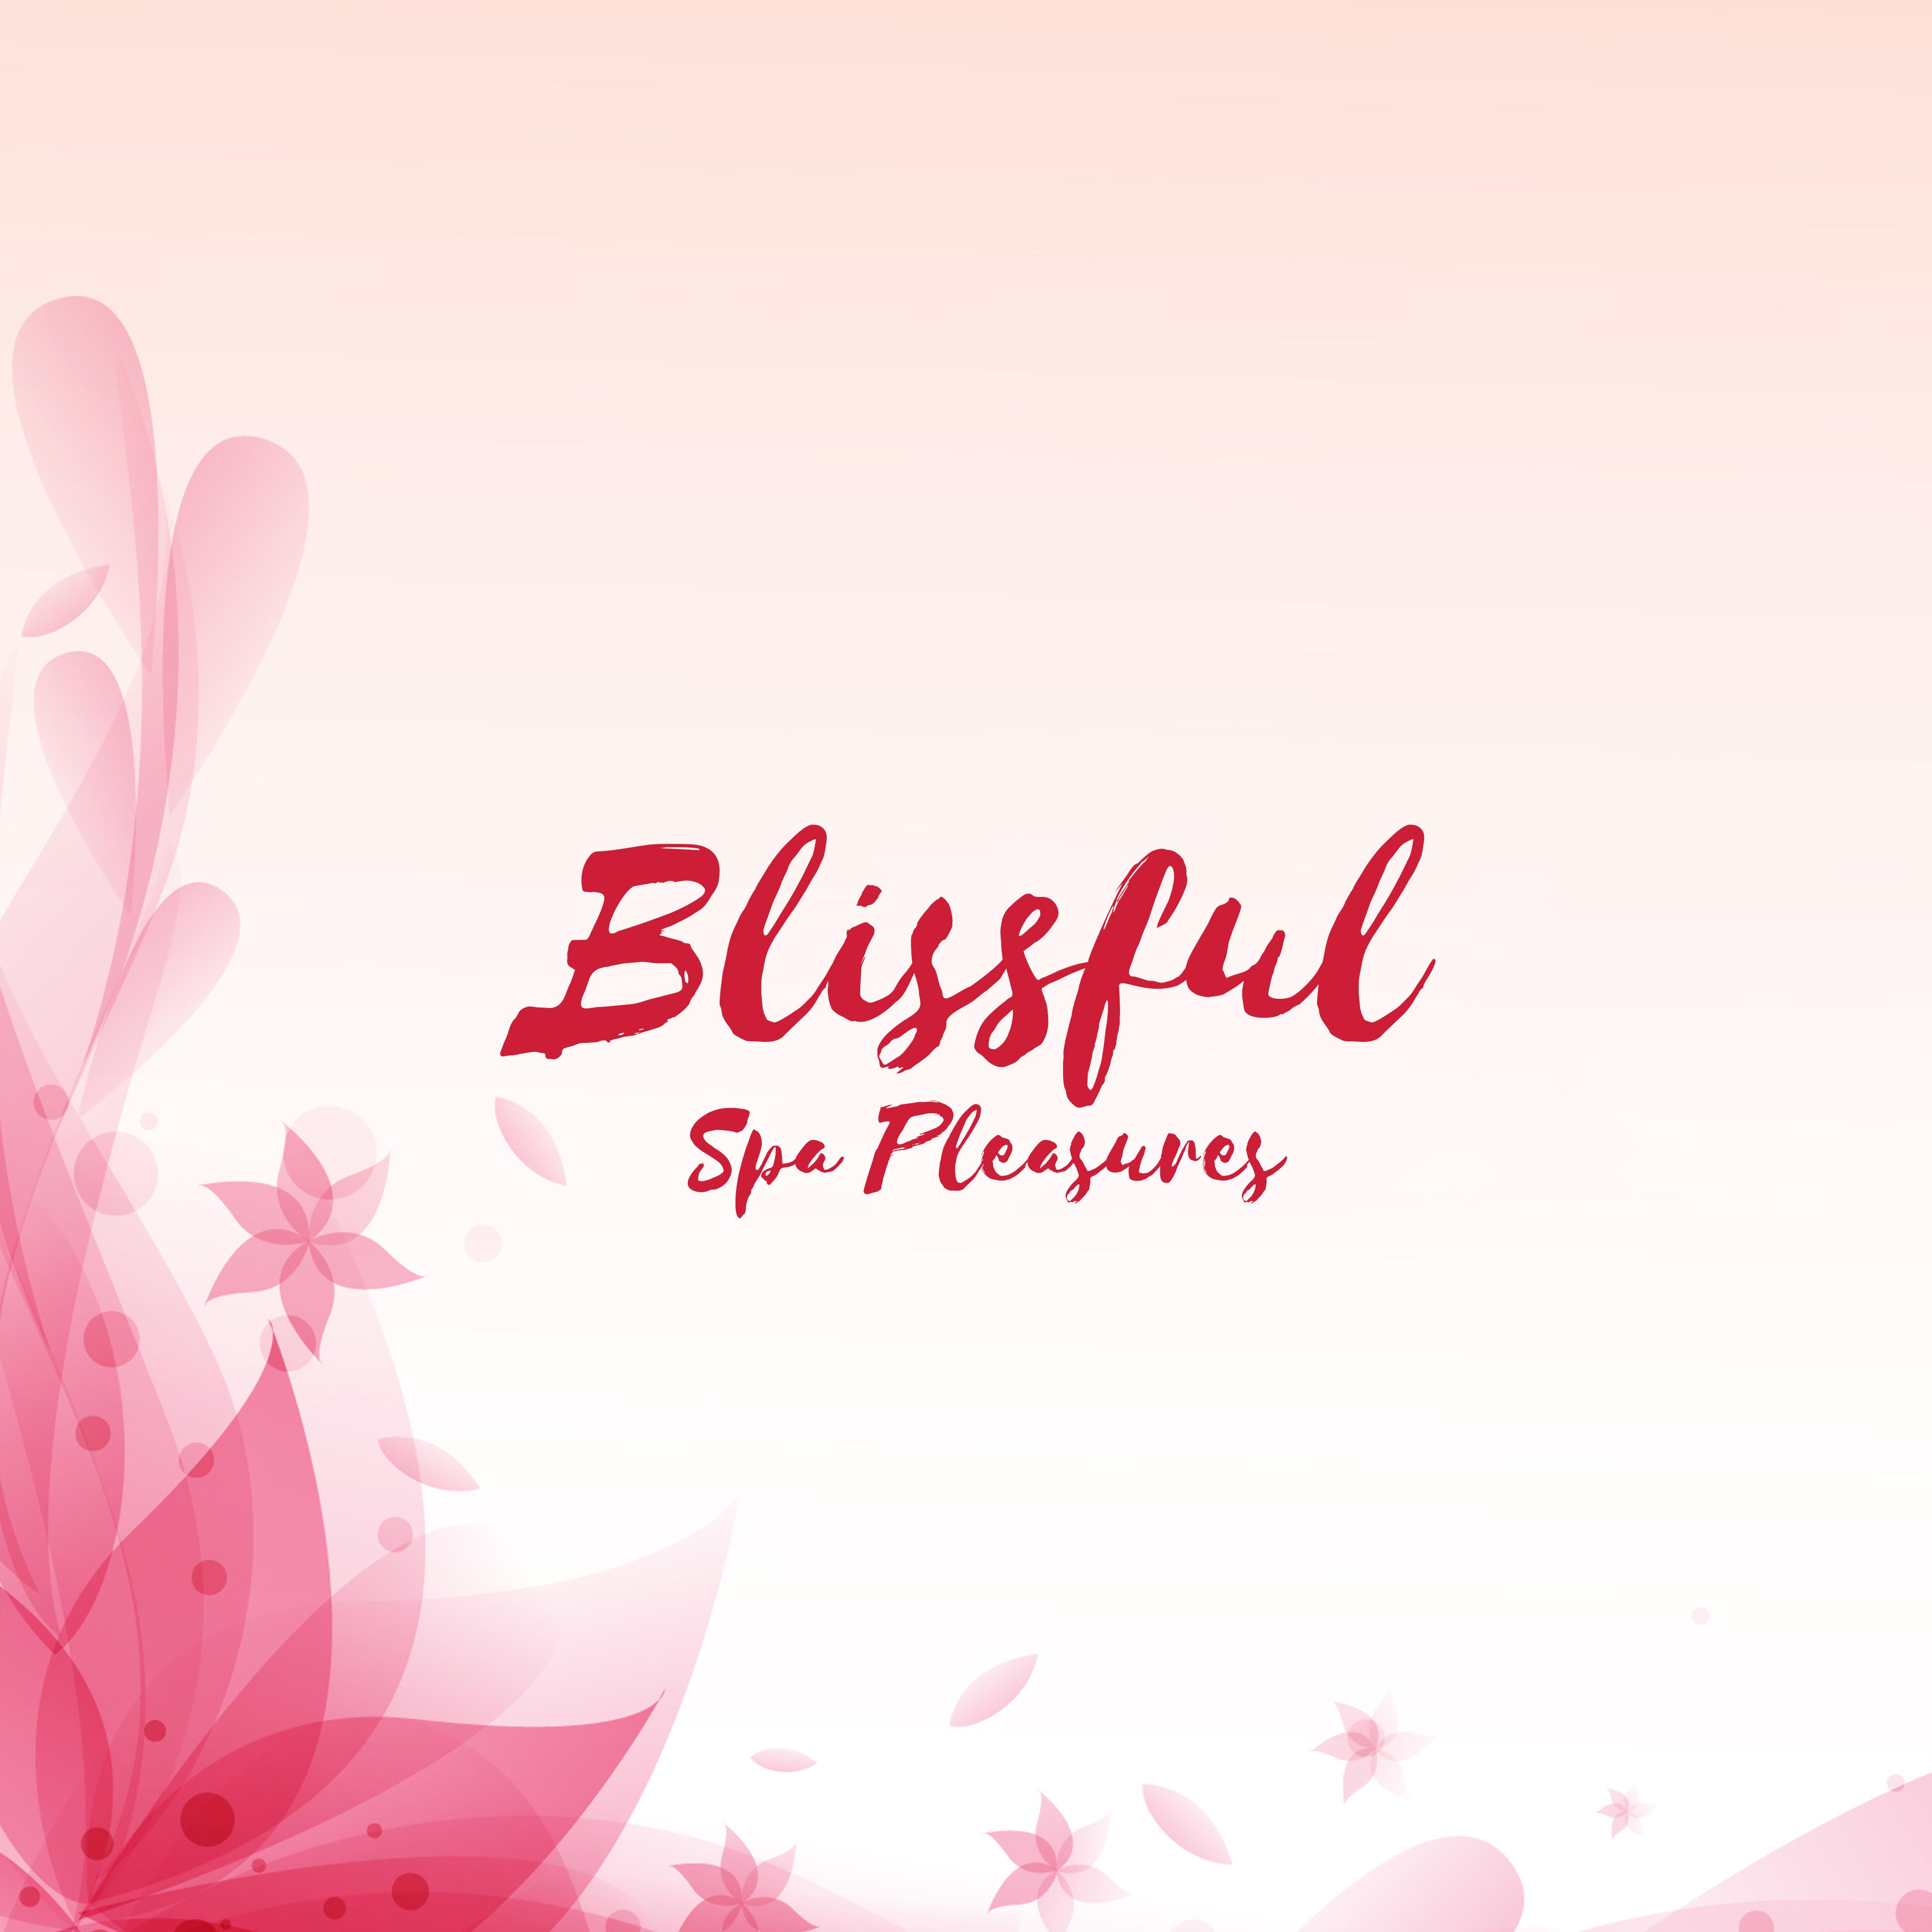 Blissful Spa Pleasures  Compilation of 15 New Age Songs with Nature Sounds for Spa  Wellness Salon, Massage Therapy  Sauna